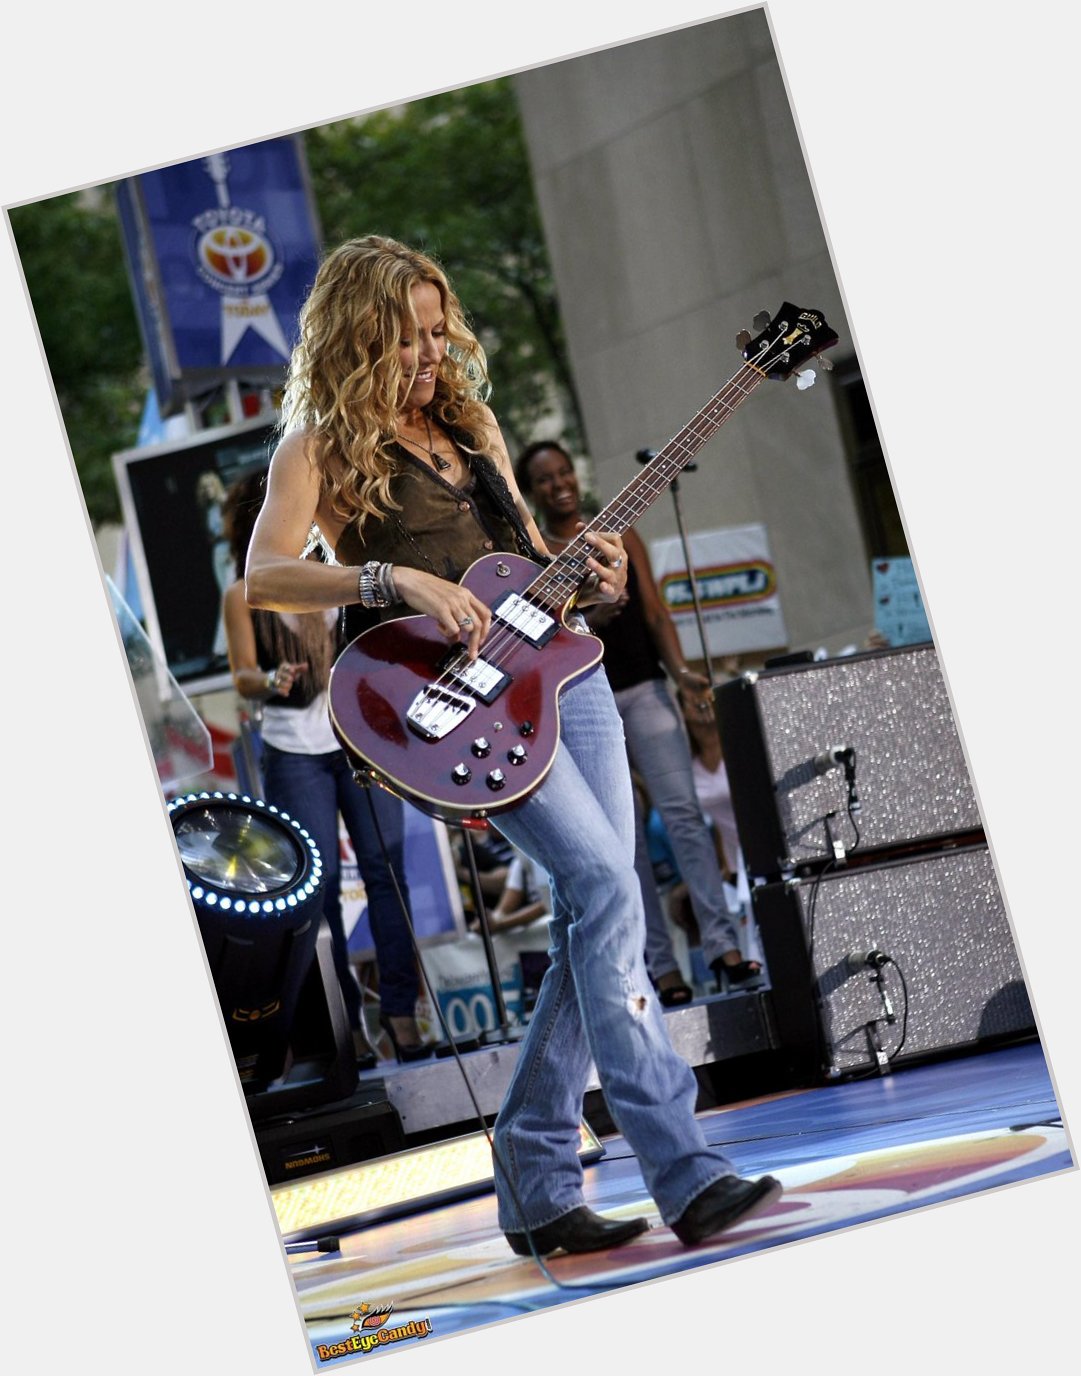 Happy Birthday to Sheryl Crow, who is a fine bass player! 